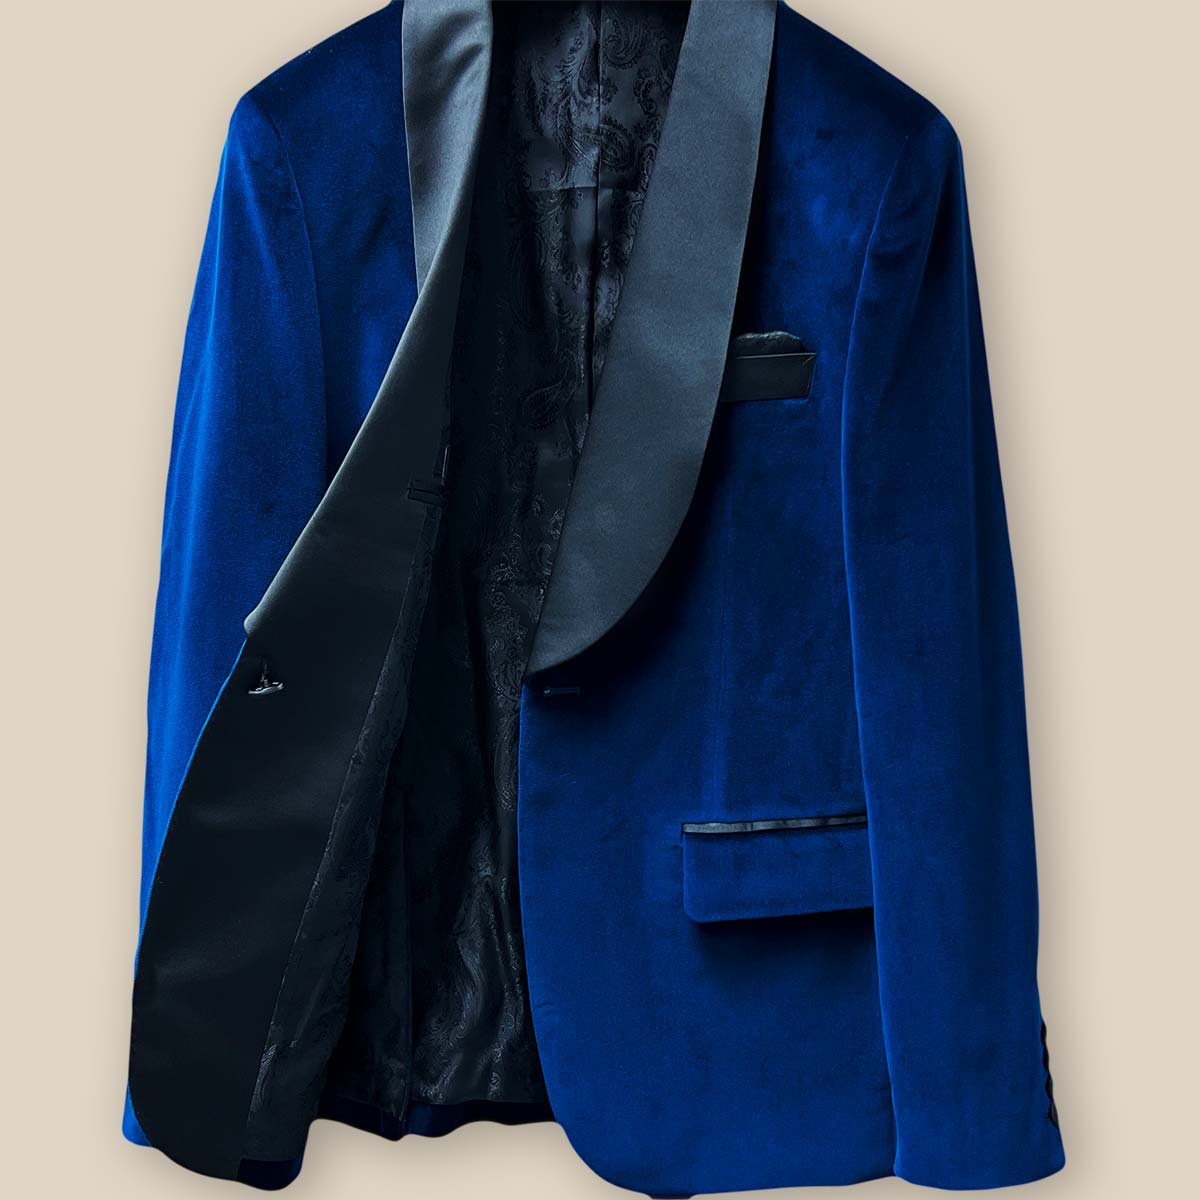 Inside jacket right view of a blue tuxedo velvet attire, showcasing meticulous tailoring for a perfect formal ensemble.